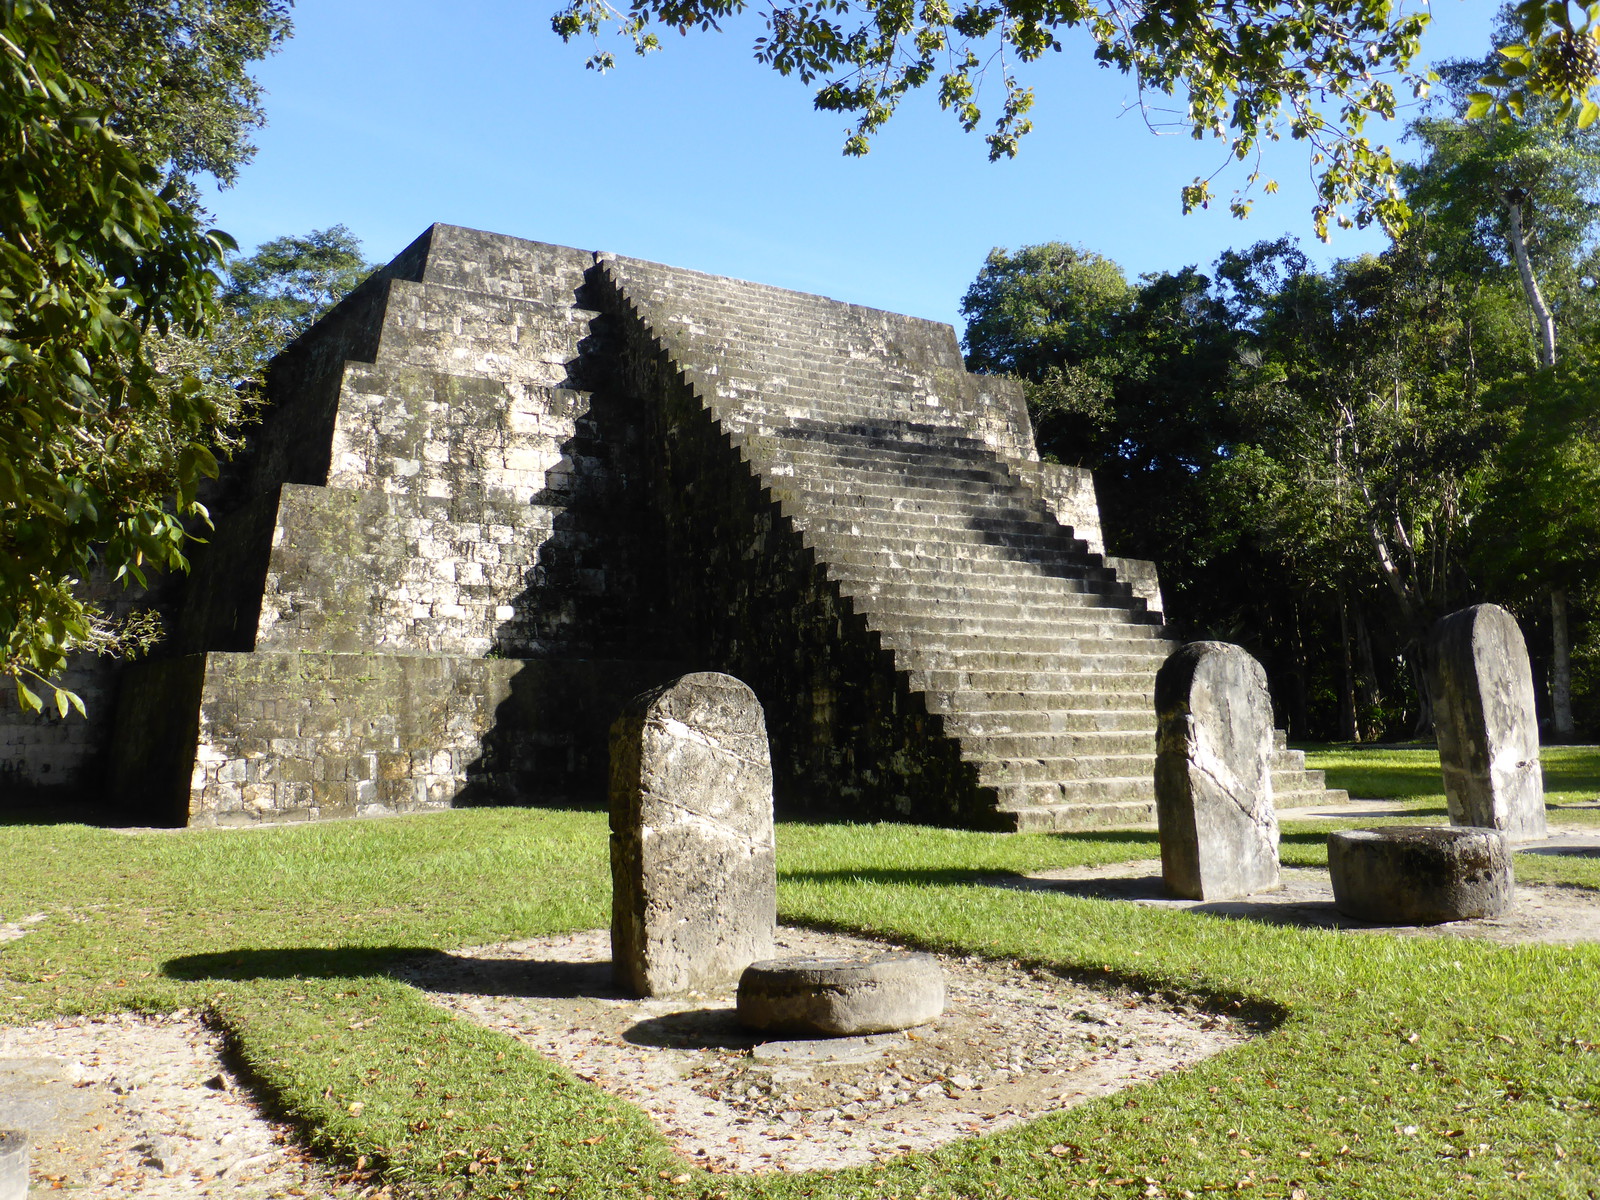 One of the twin pyramids of Complejo Q